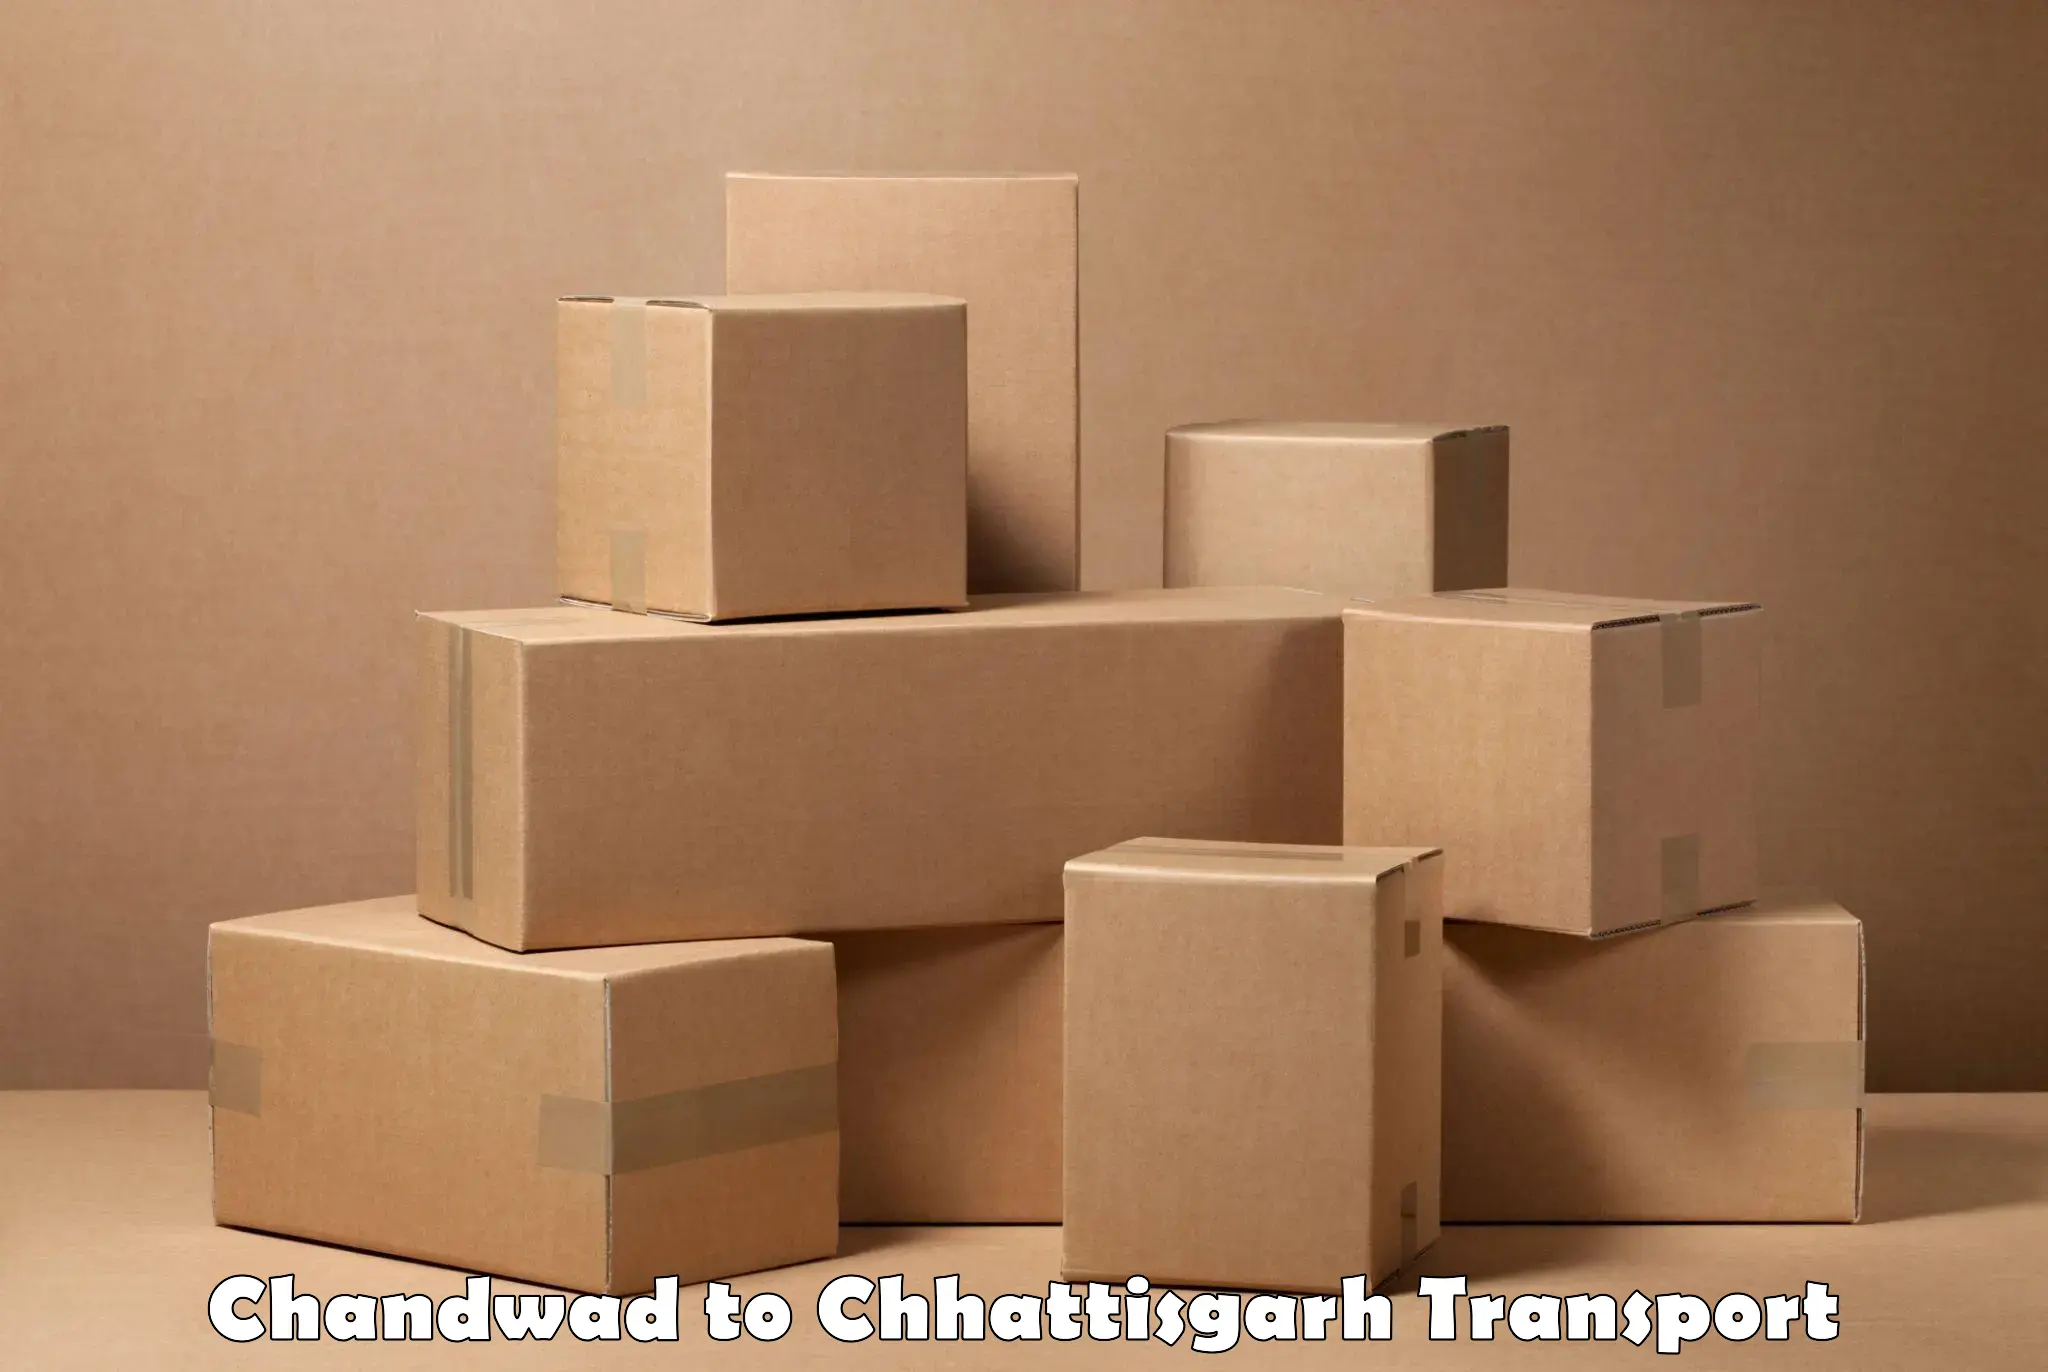 Commercial transport service Chandwad to Manendragarh